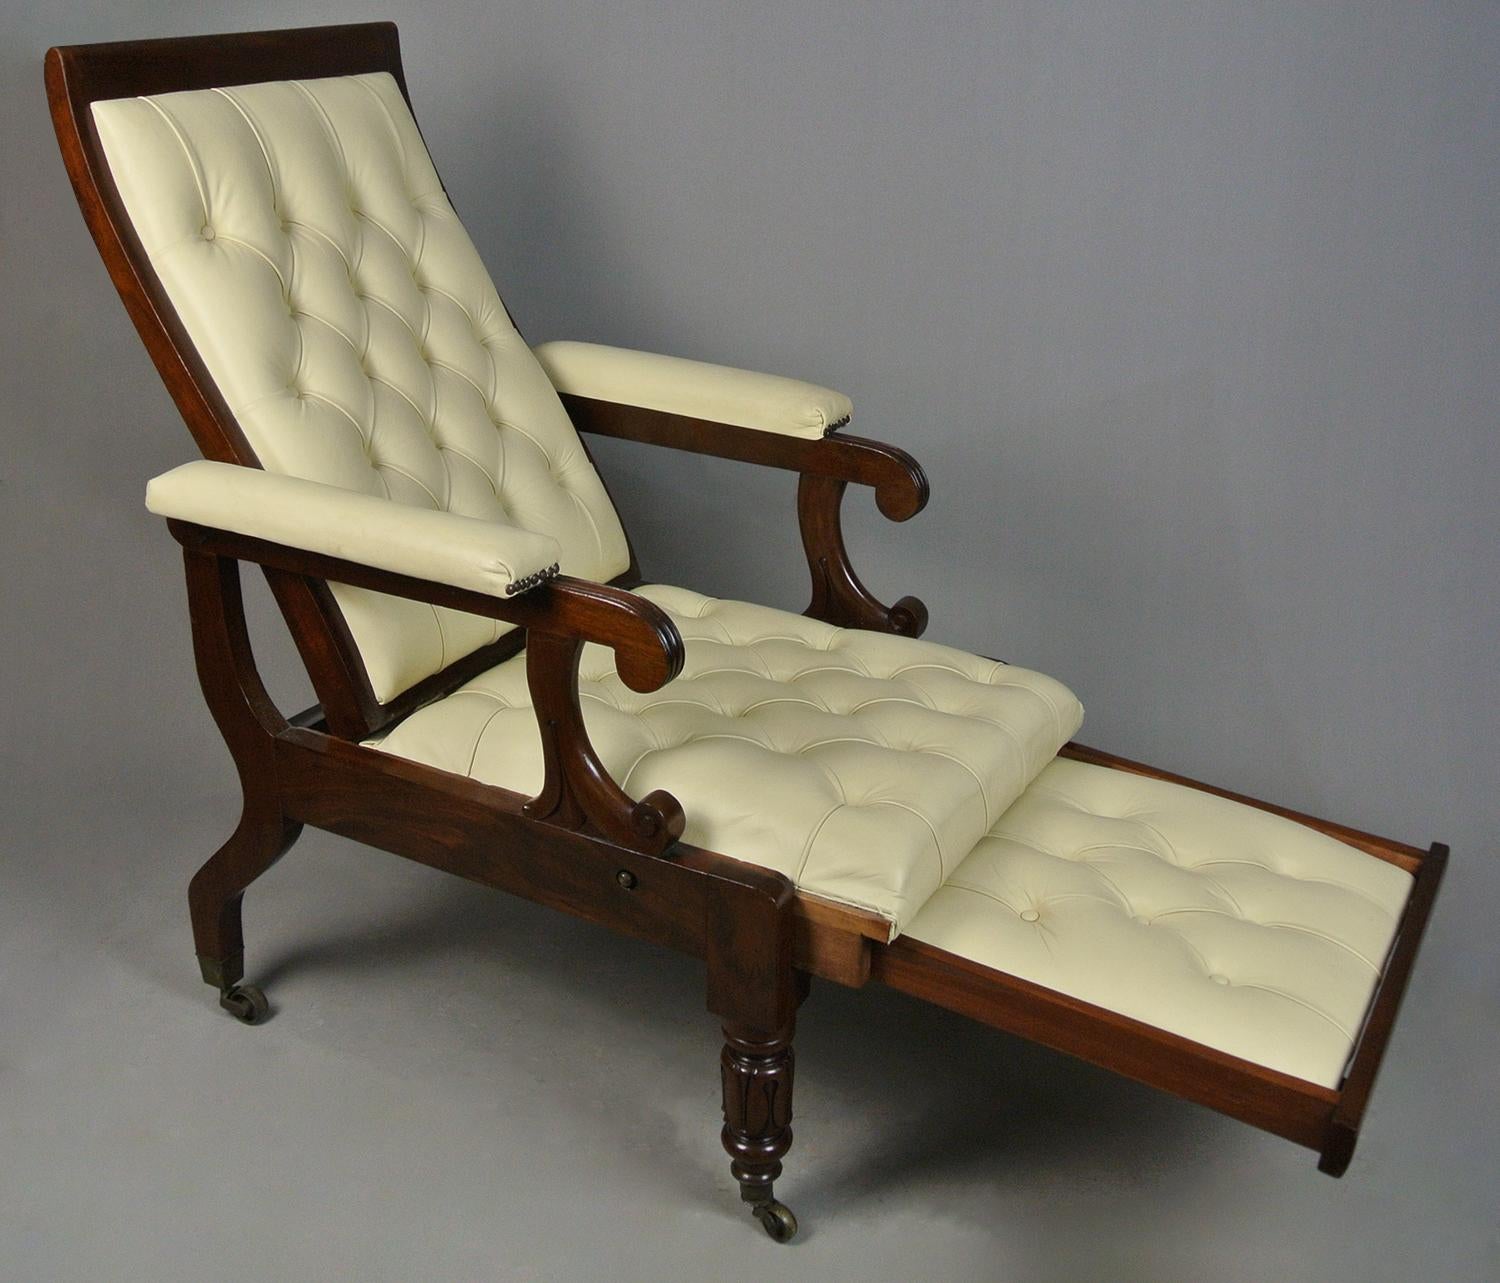 Regency Solid Mahogany ‘Daws Patent’ Reclining Chair c. 1830 In Good Condition For Sale In Heathfield, GB